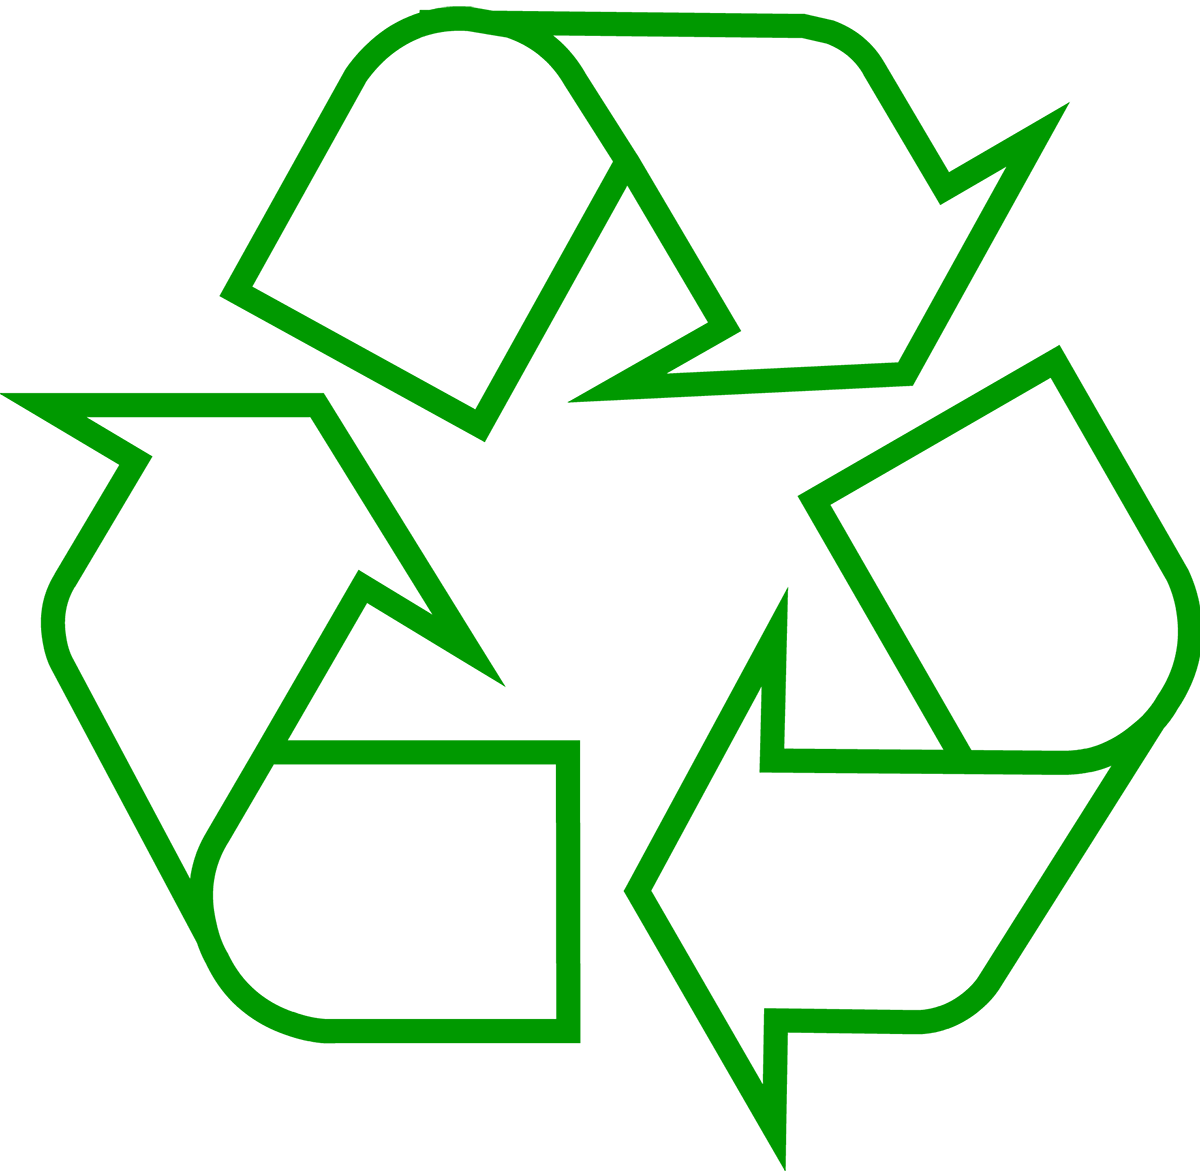 Green Recycle Logo - Recycling Symbol the Original Recycle Logo